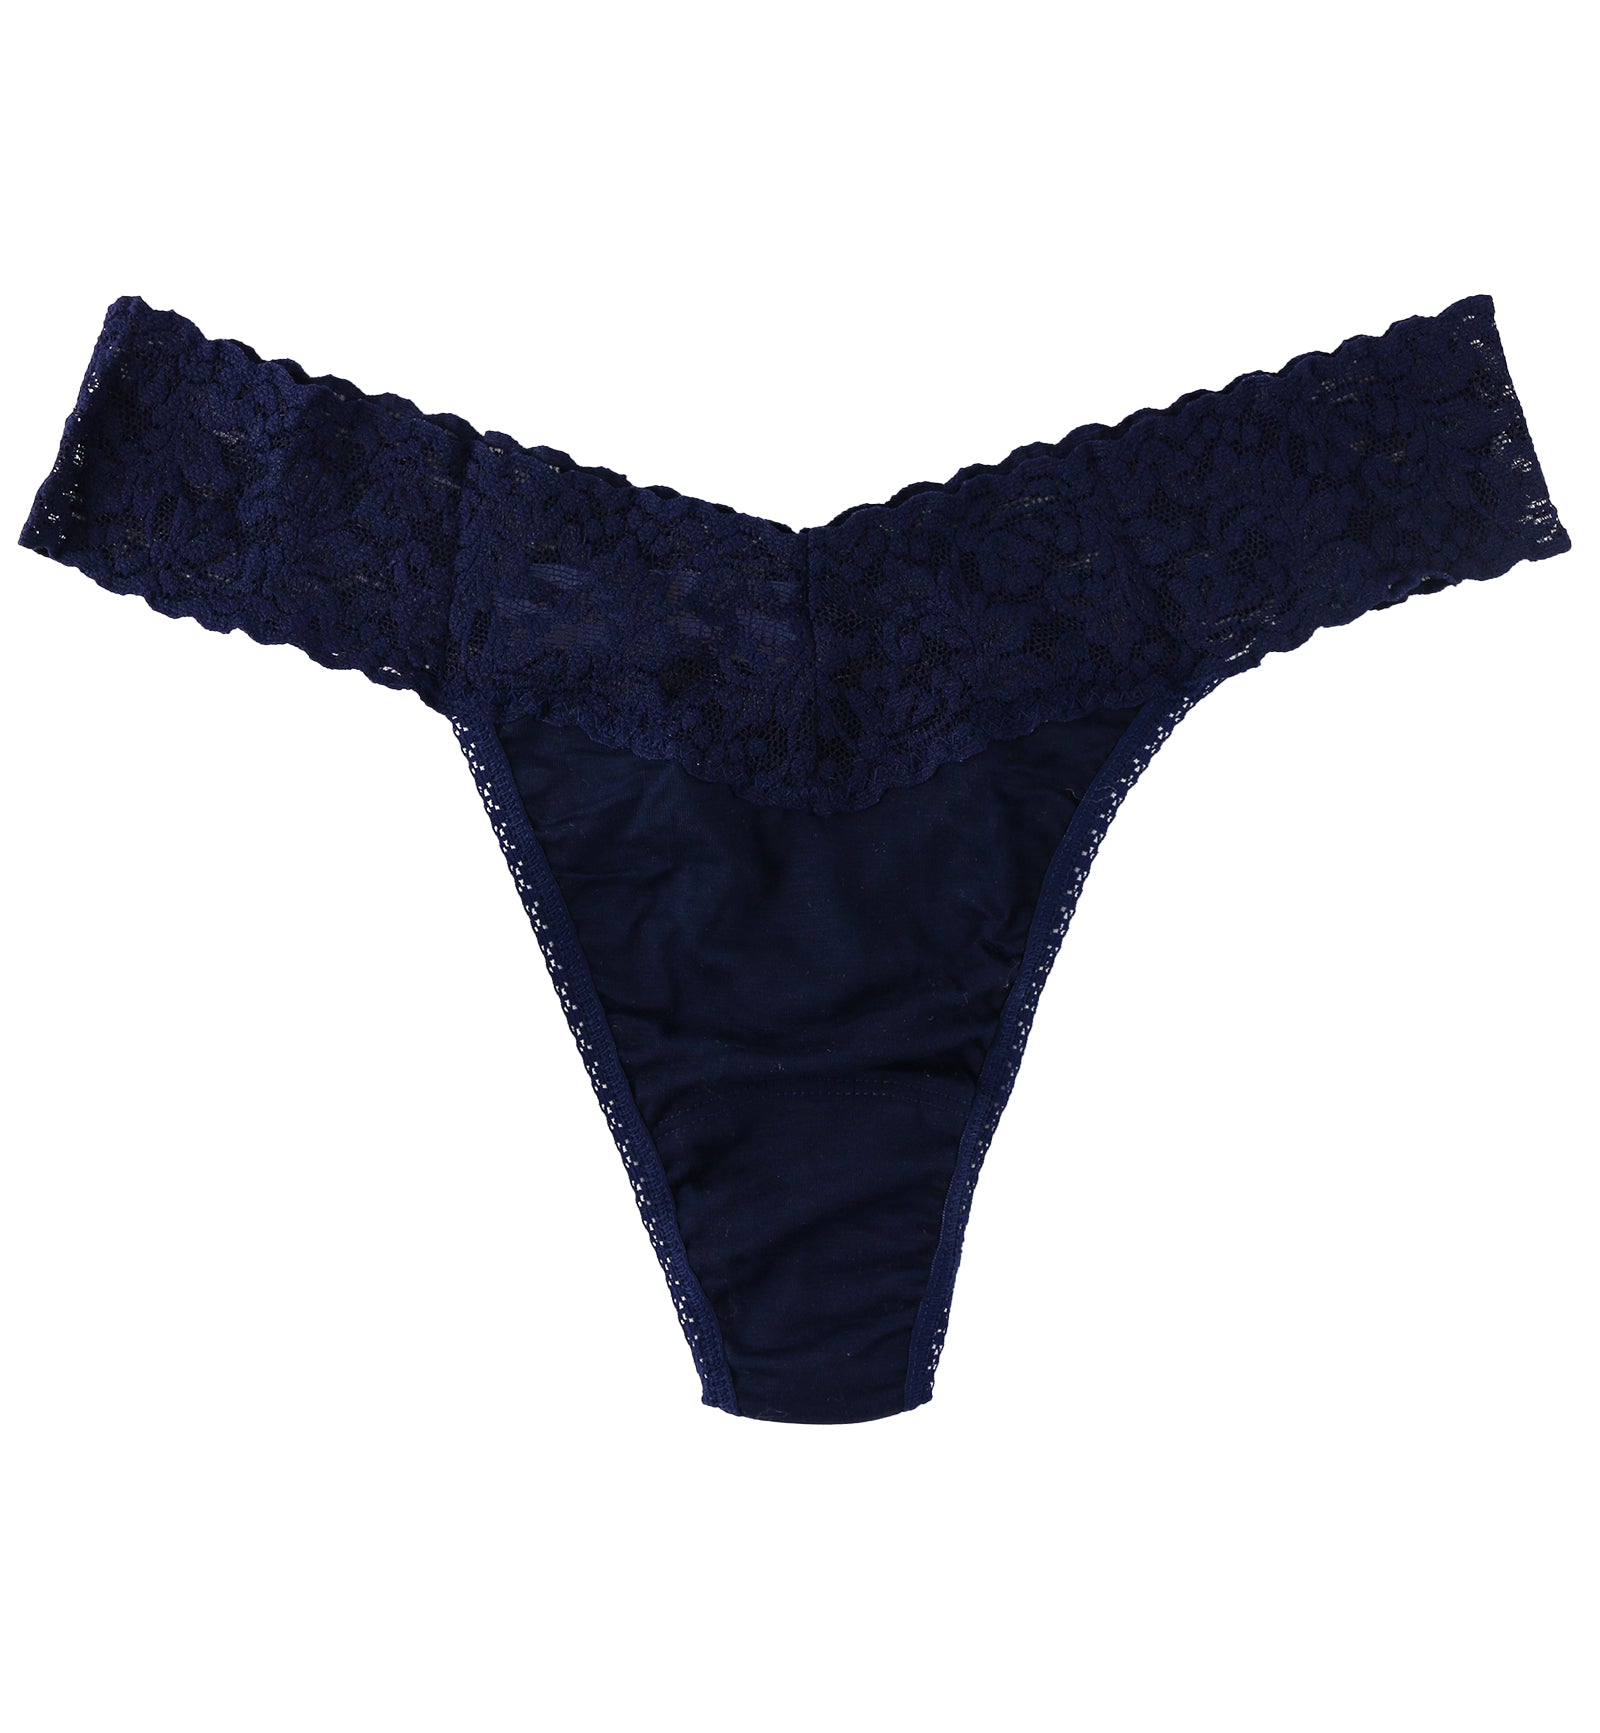 Hanky Panky Original Rise Organic Cotton Thong with Lace (891801),Navy - Navy,One Size